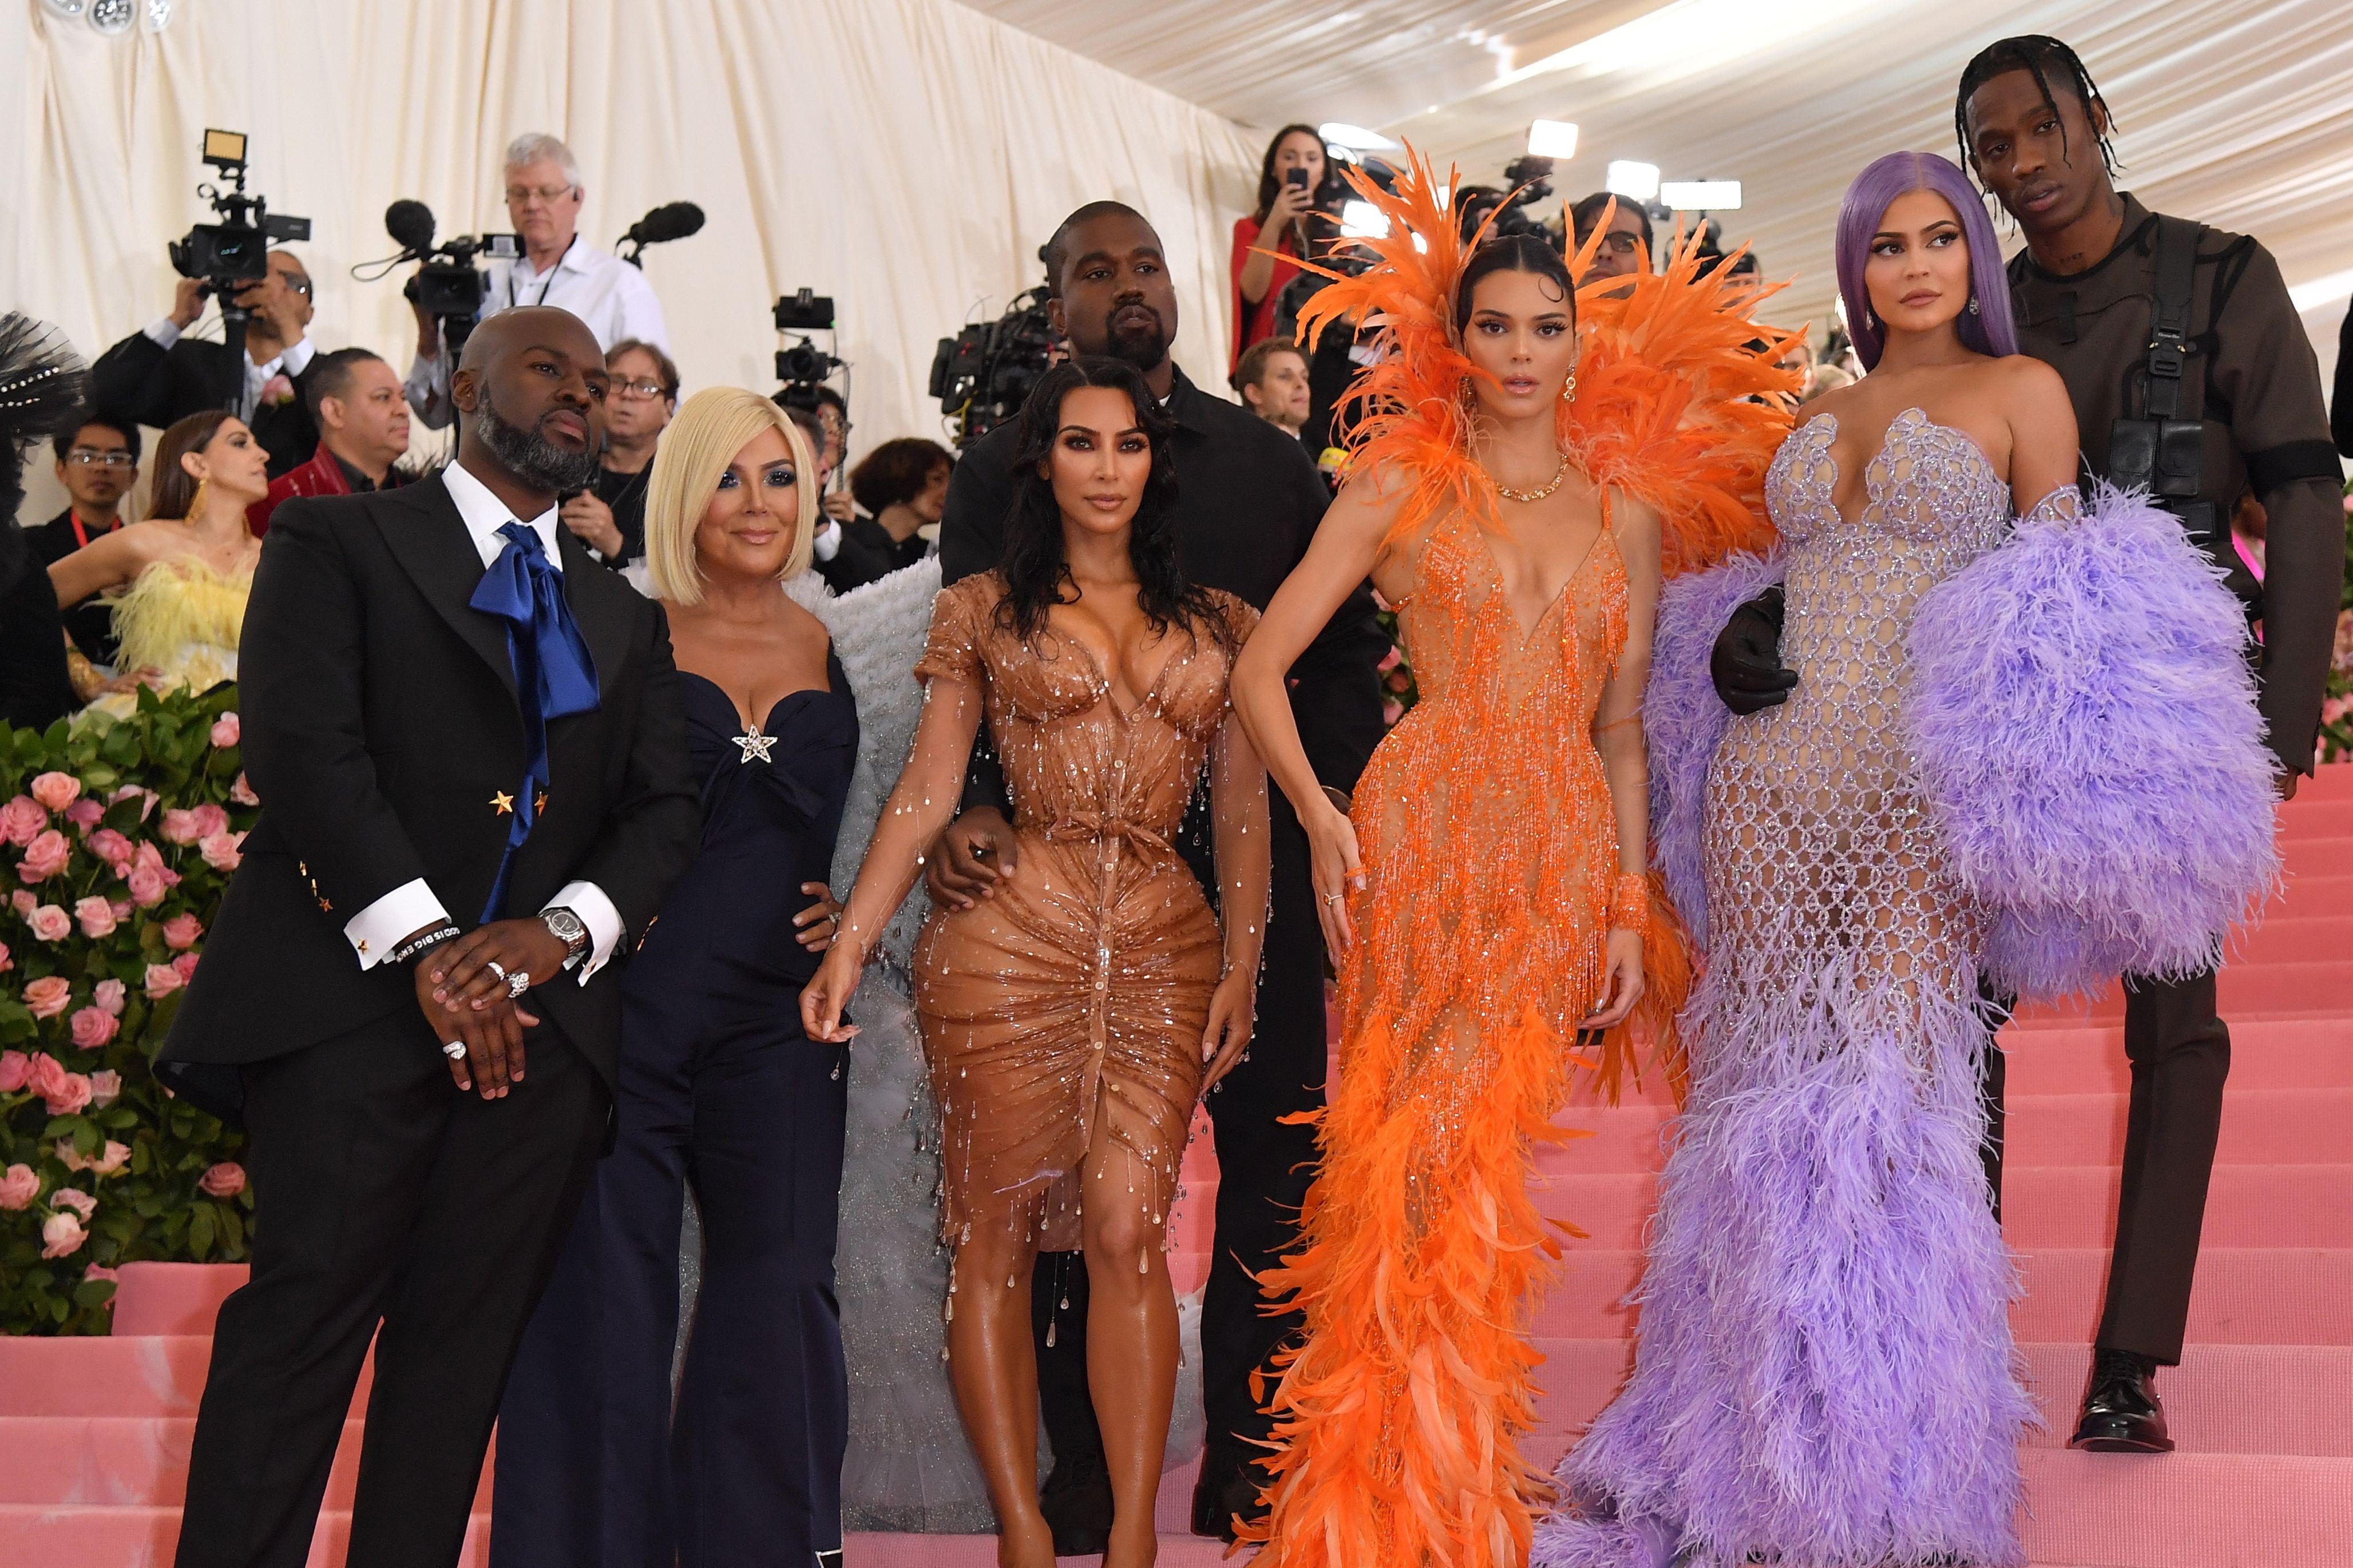 Corey Gamble, Kris Jenner, Kanye West, Kim Kardashian West, Kendall Jenner, Kylie Jenner, and Travis Scott on the stairs of the Met.